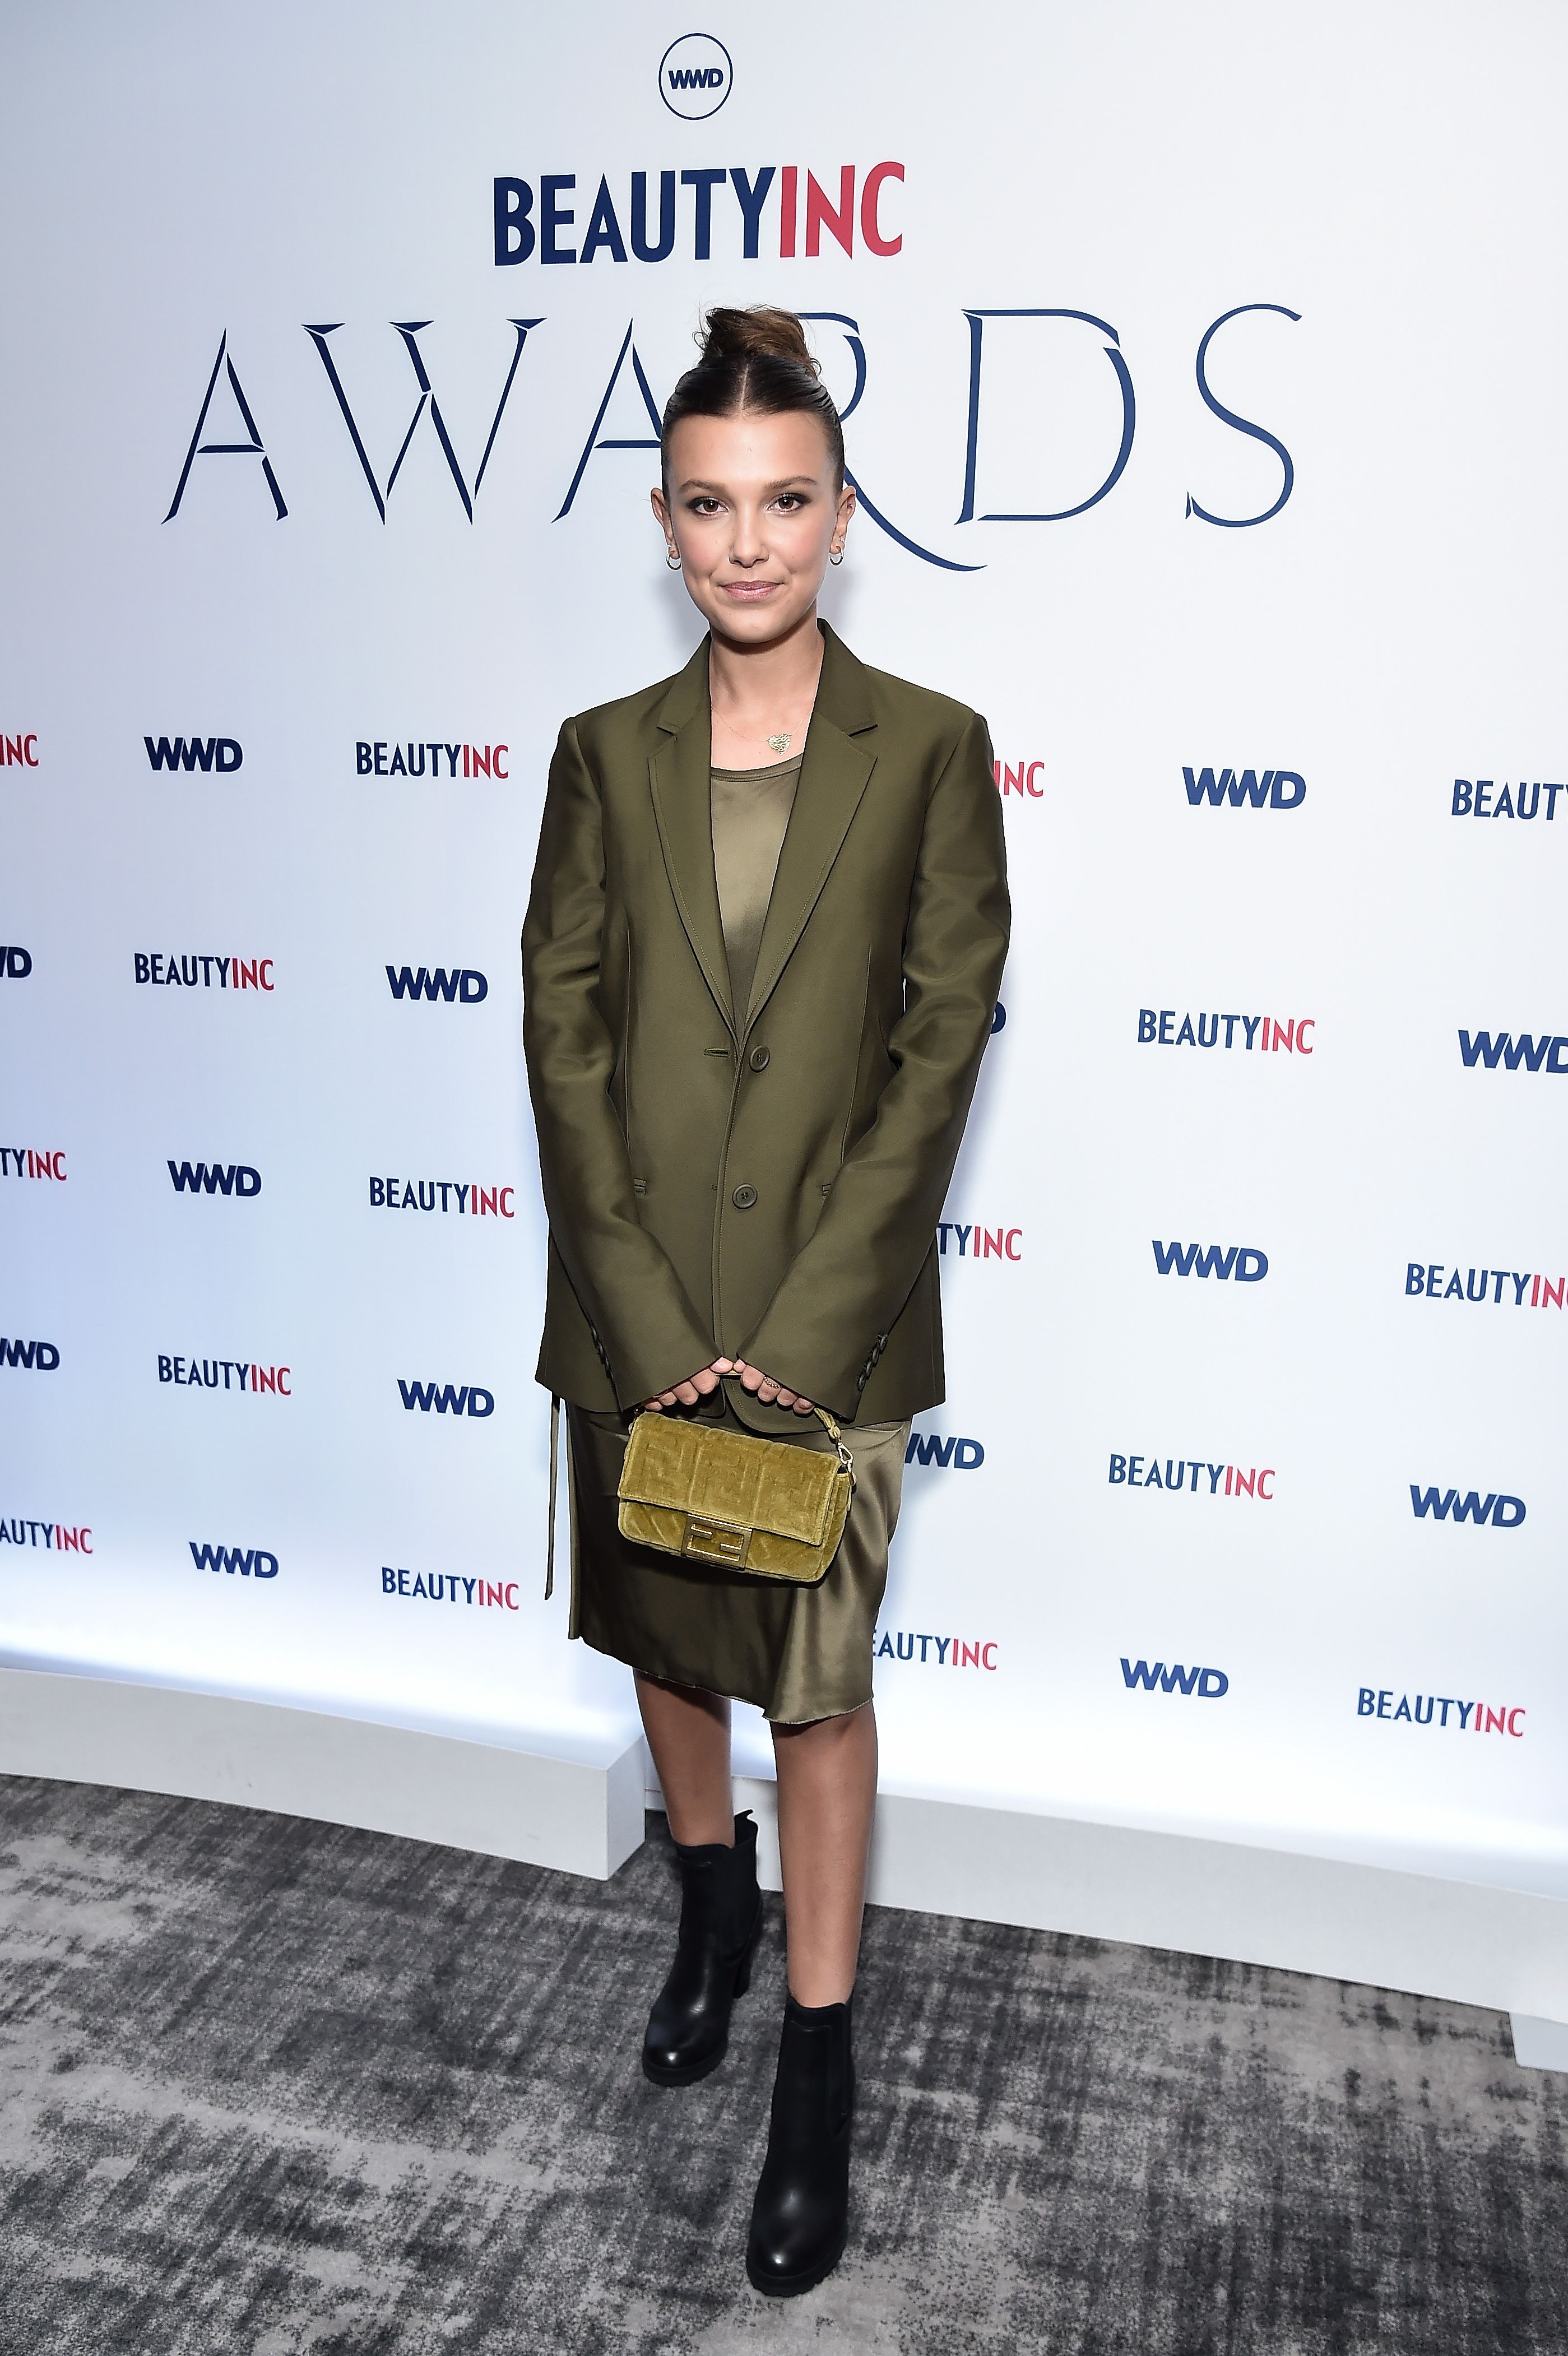 Millie Bobby Brown Best Style Photos: Outfit Pictures